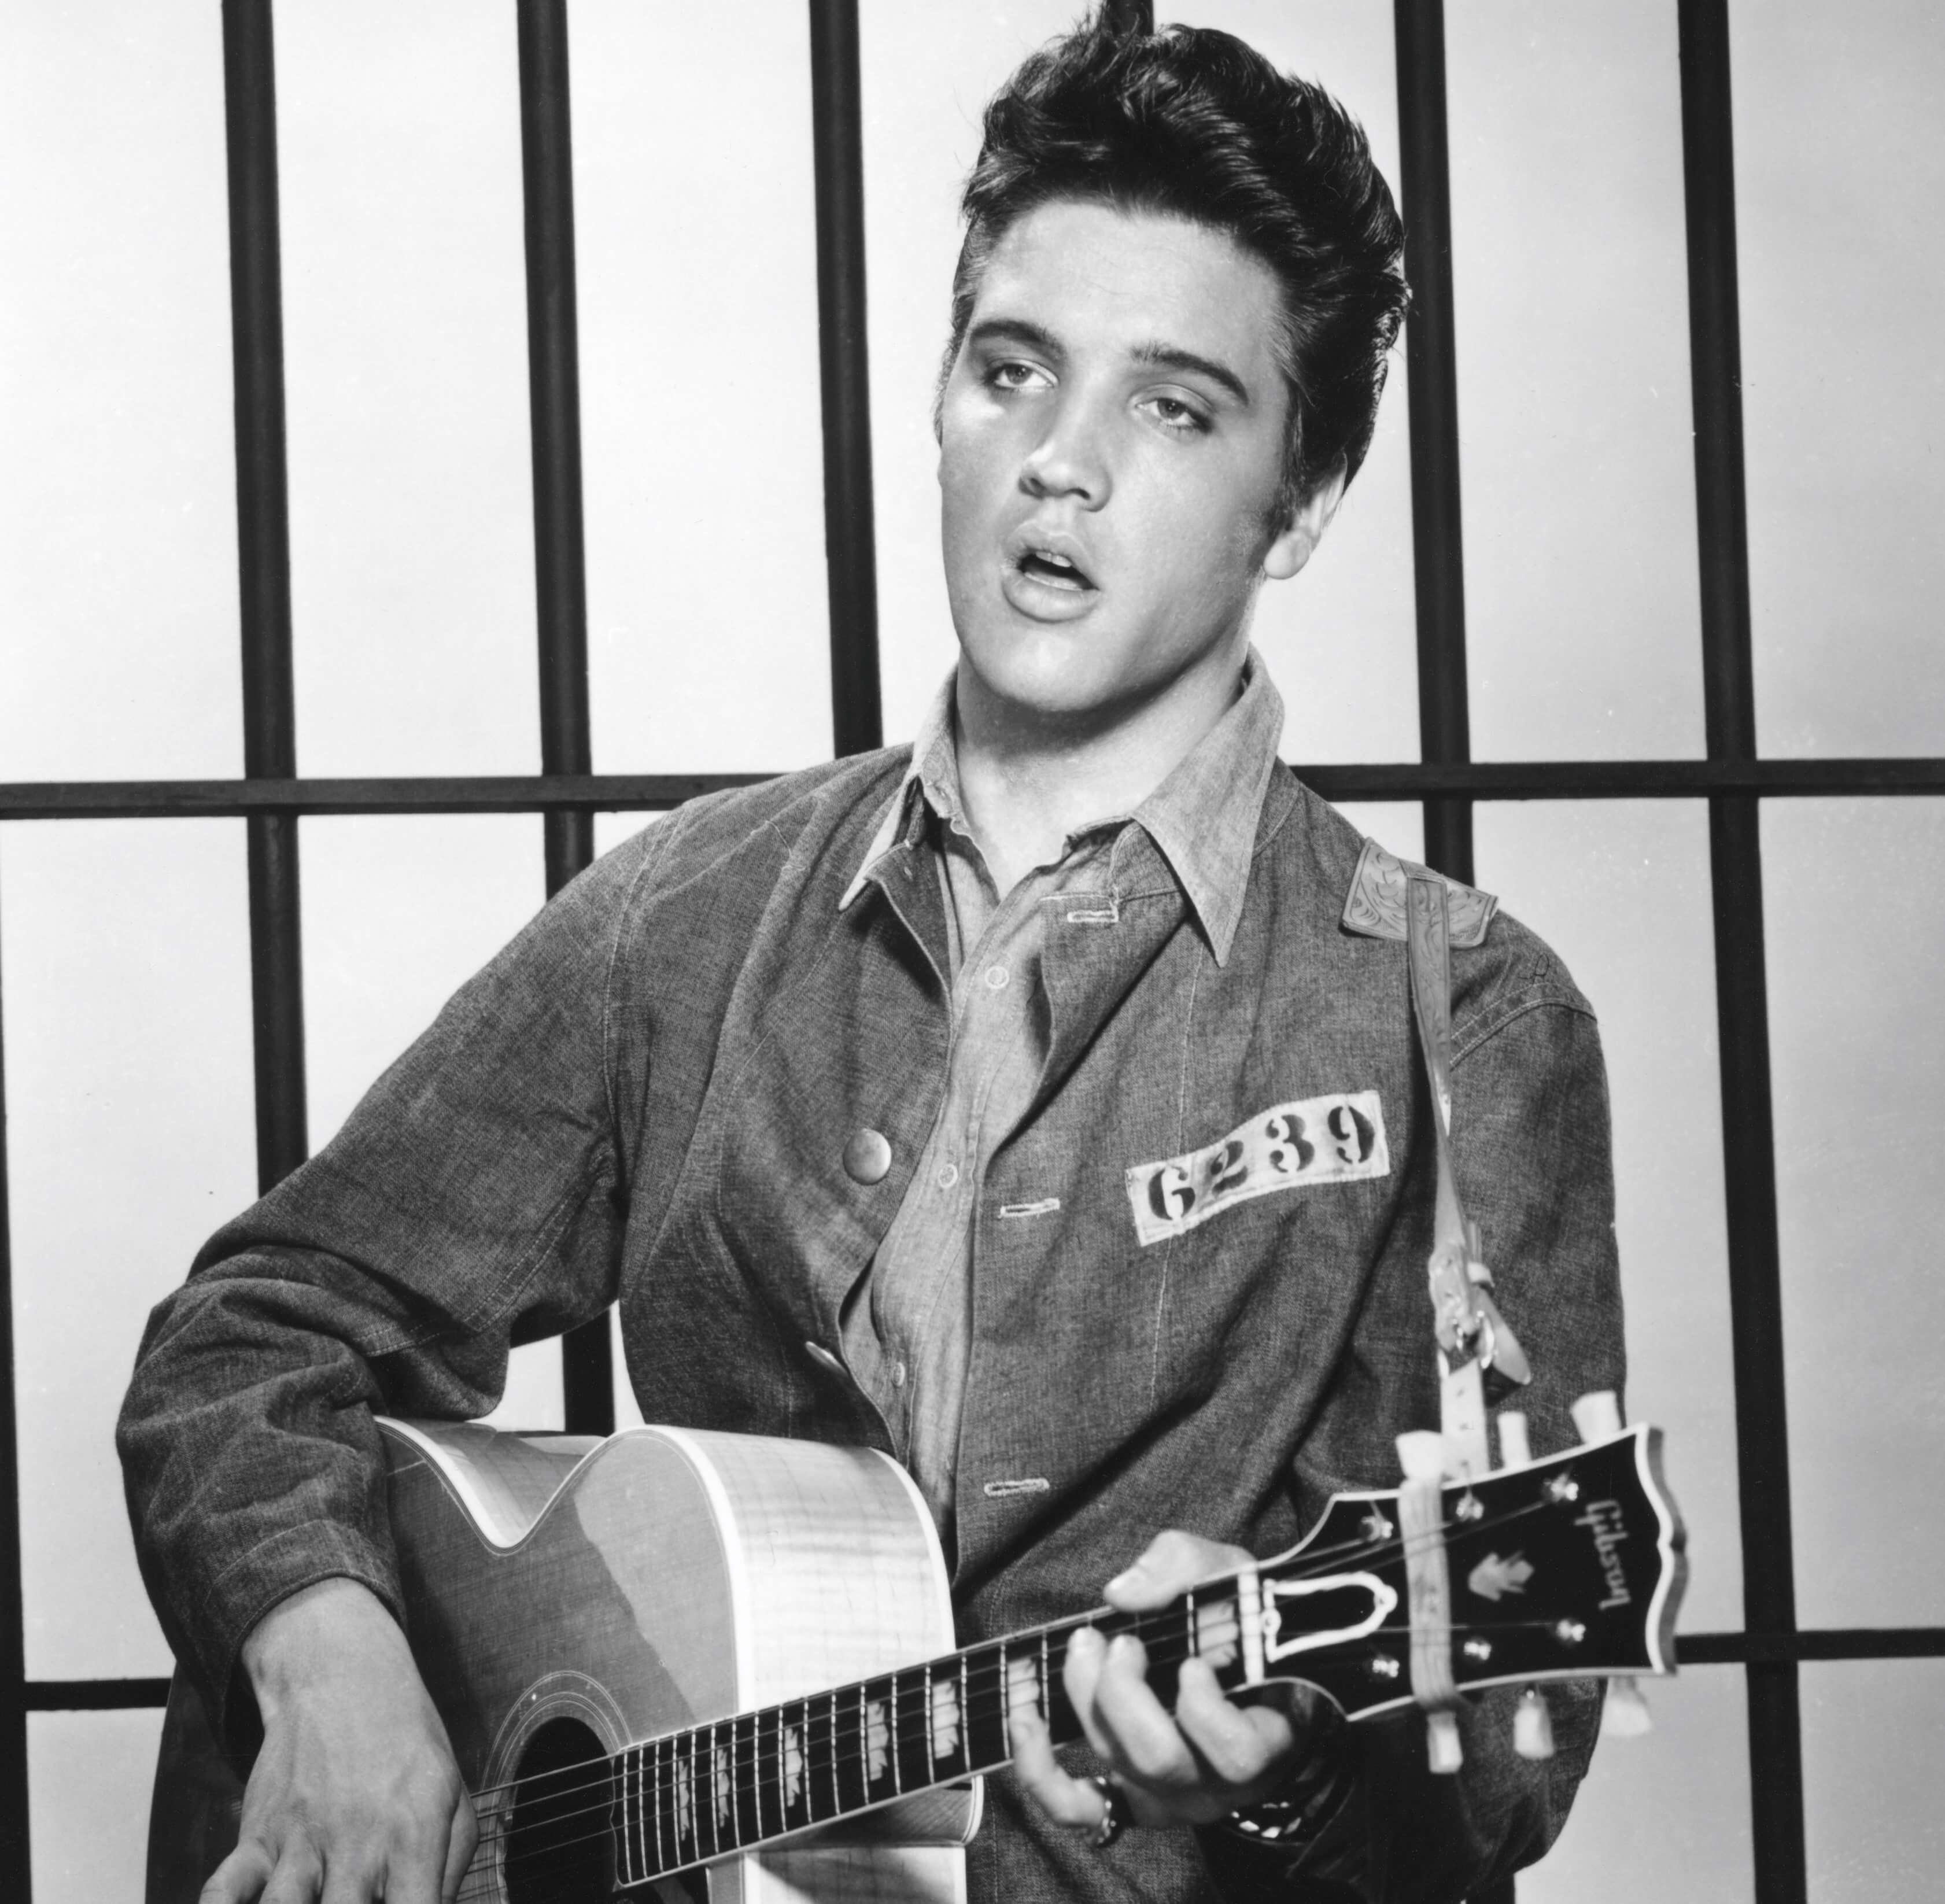 Elvis Presley with a guitar in 'Jailhouse Rock'